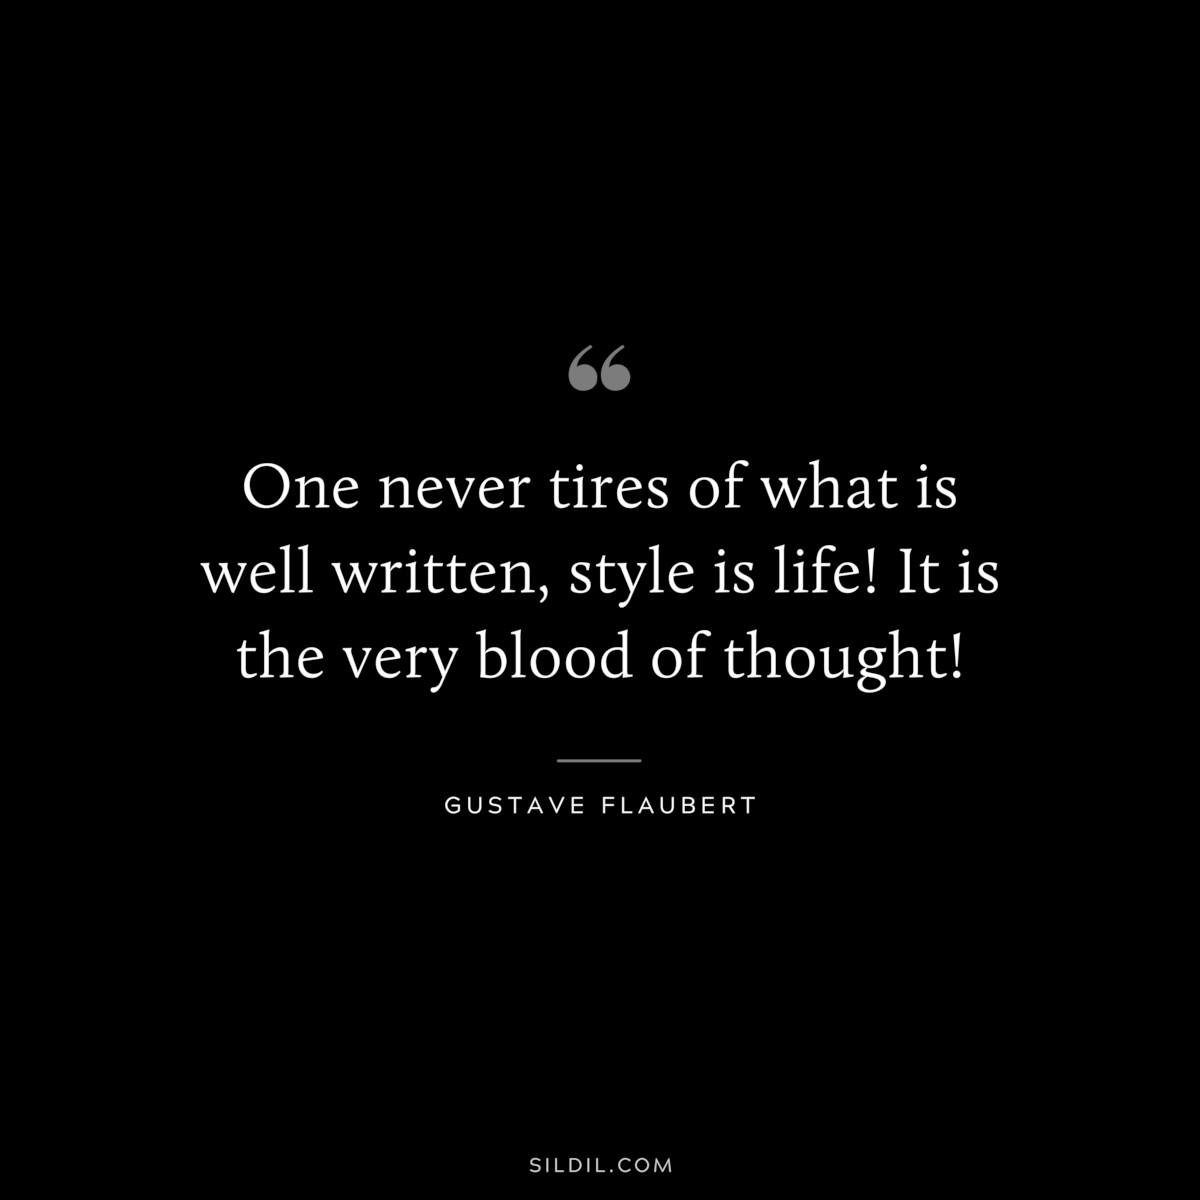 One never tires of what is well written, style is life! It is the very blood of thought! ― Gustave Flaubert